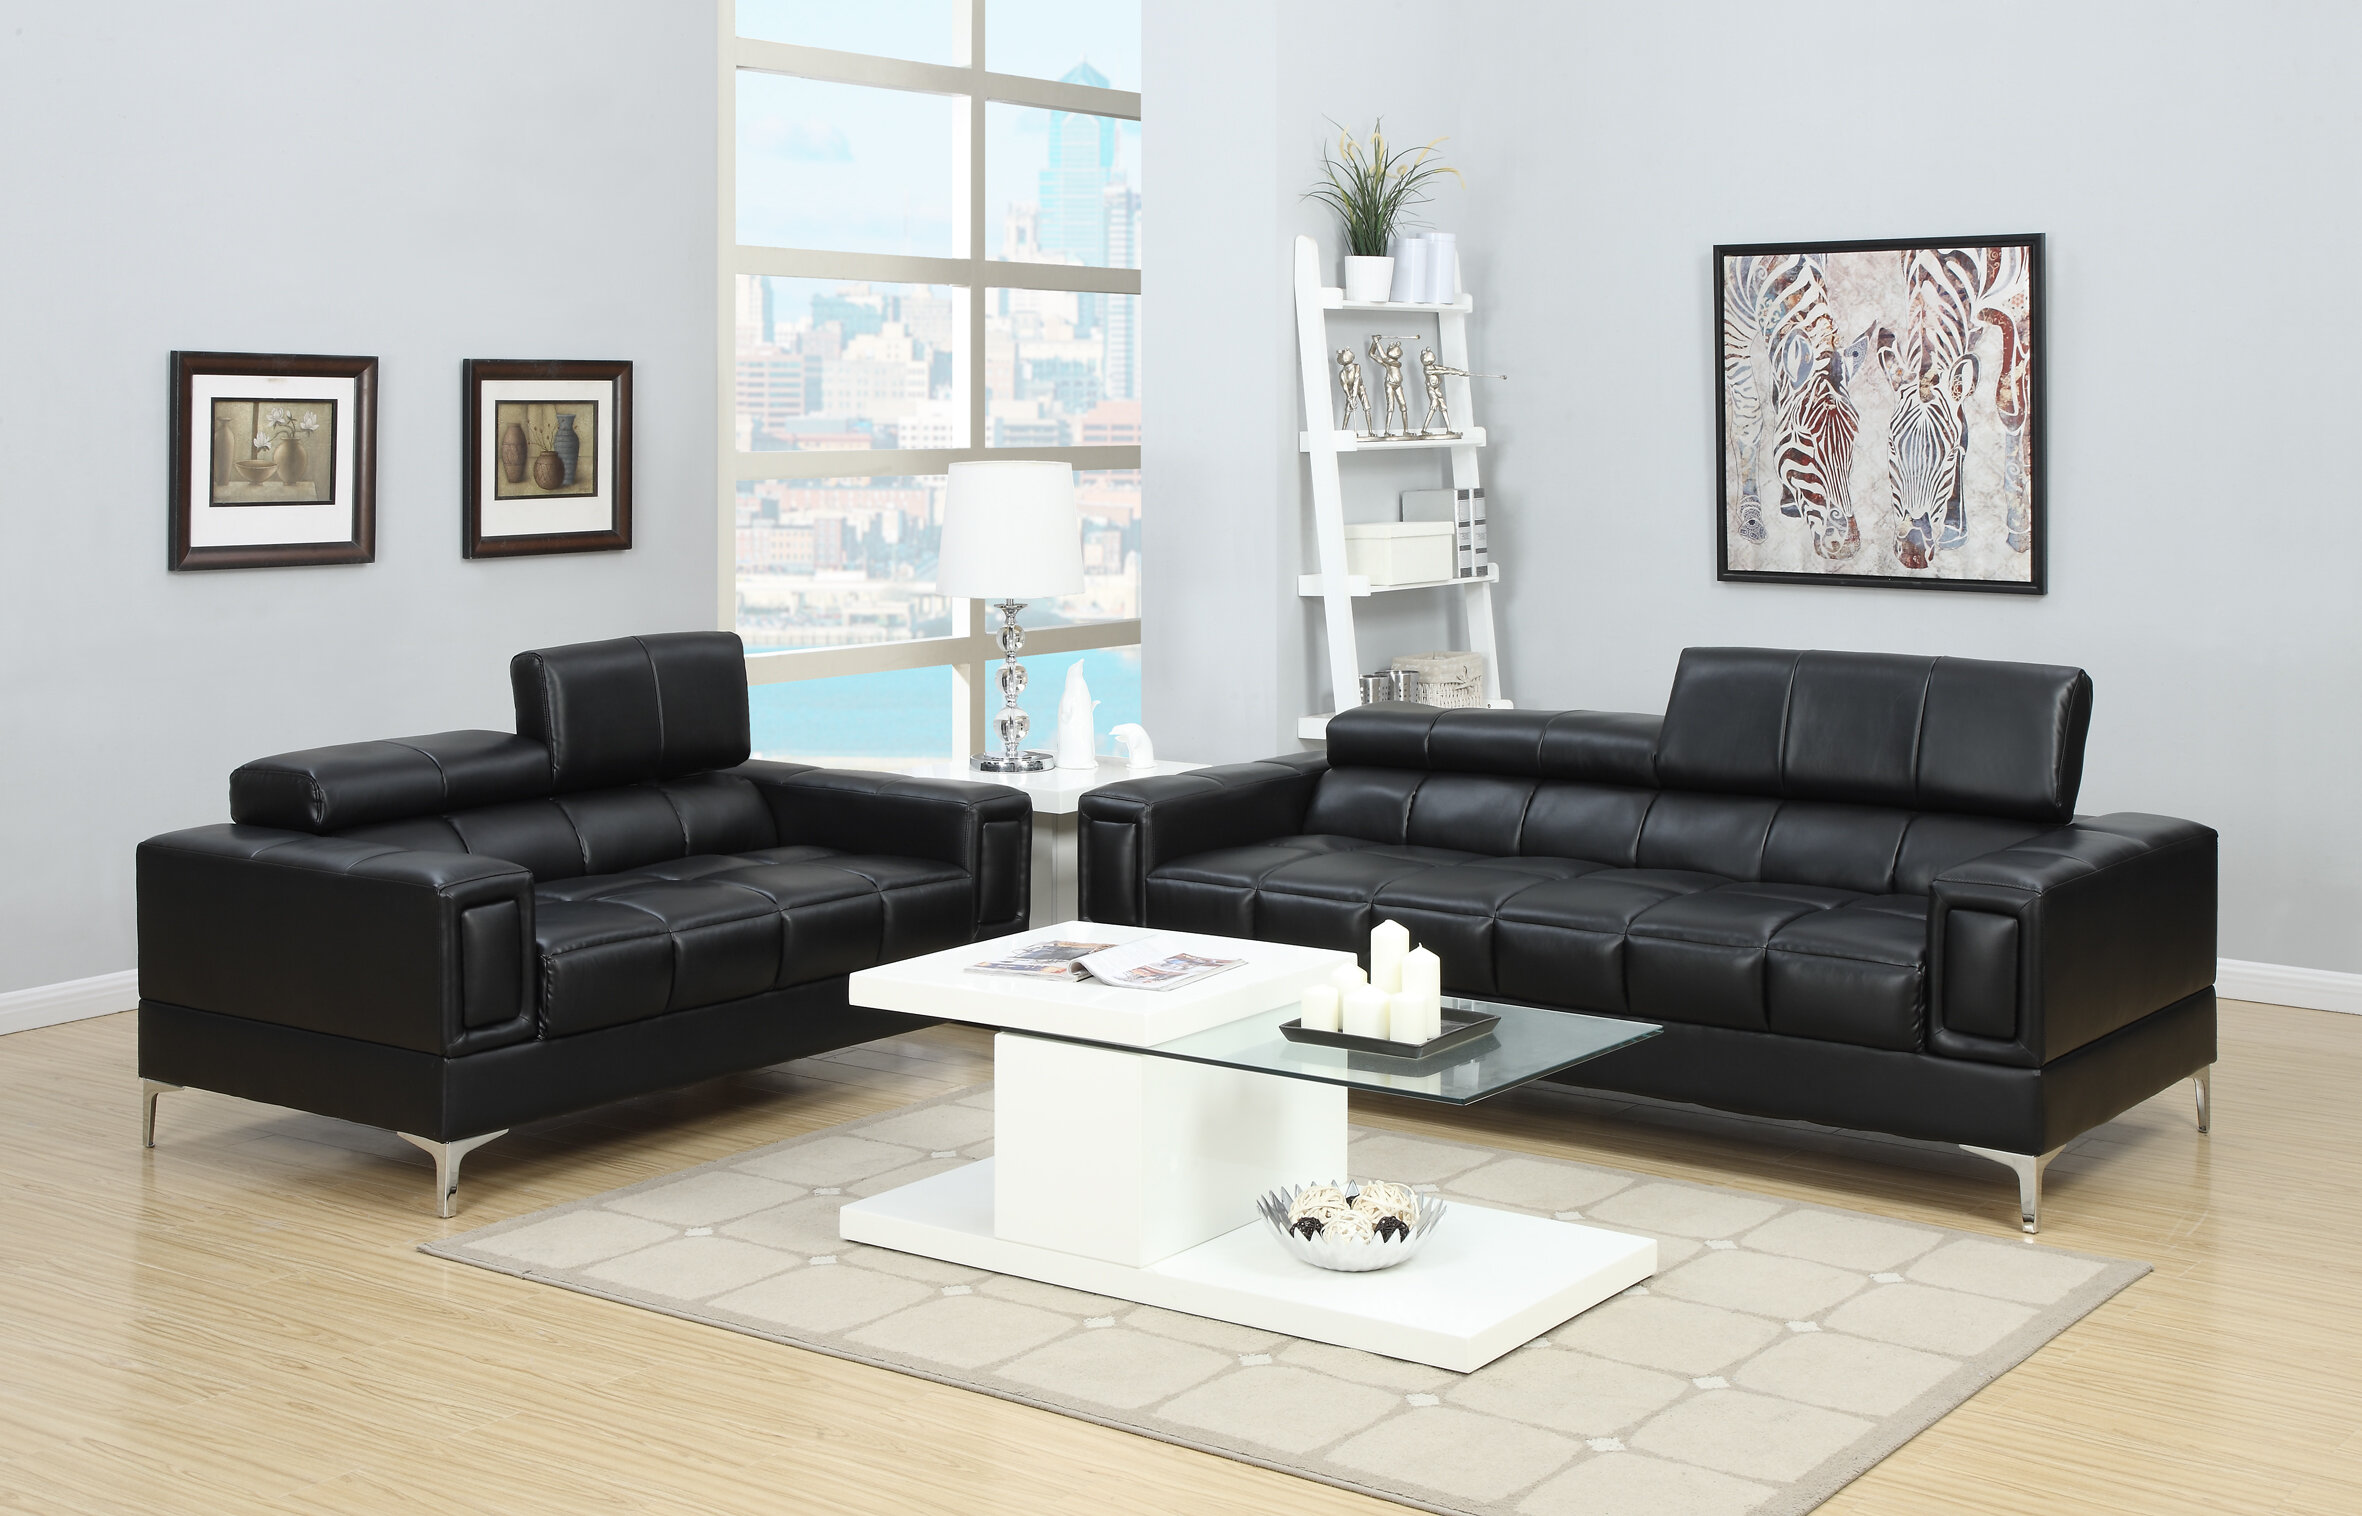 Loveseat Details about   Modern 4-Piece Faux Leather Sofa Set Couch White Chair & Ottoman 